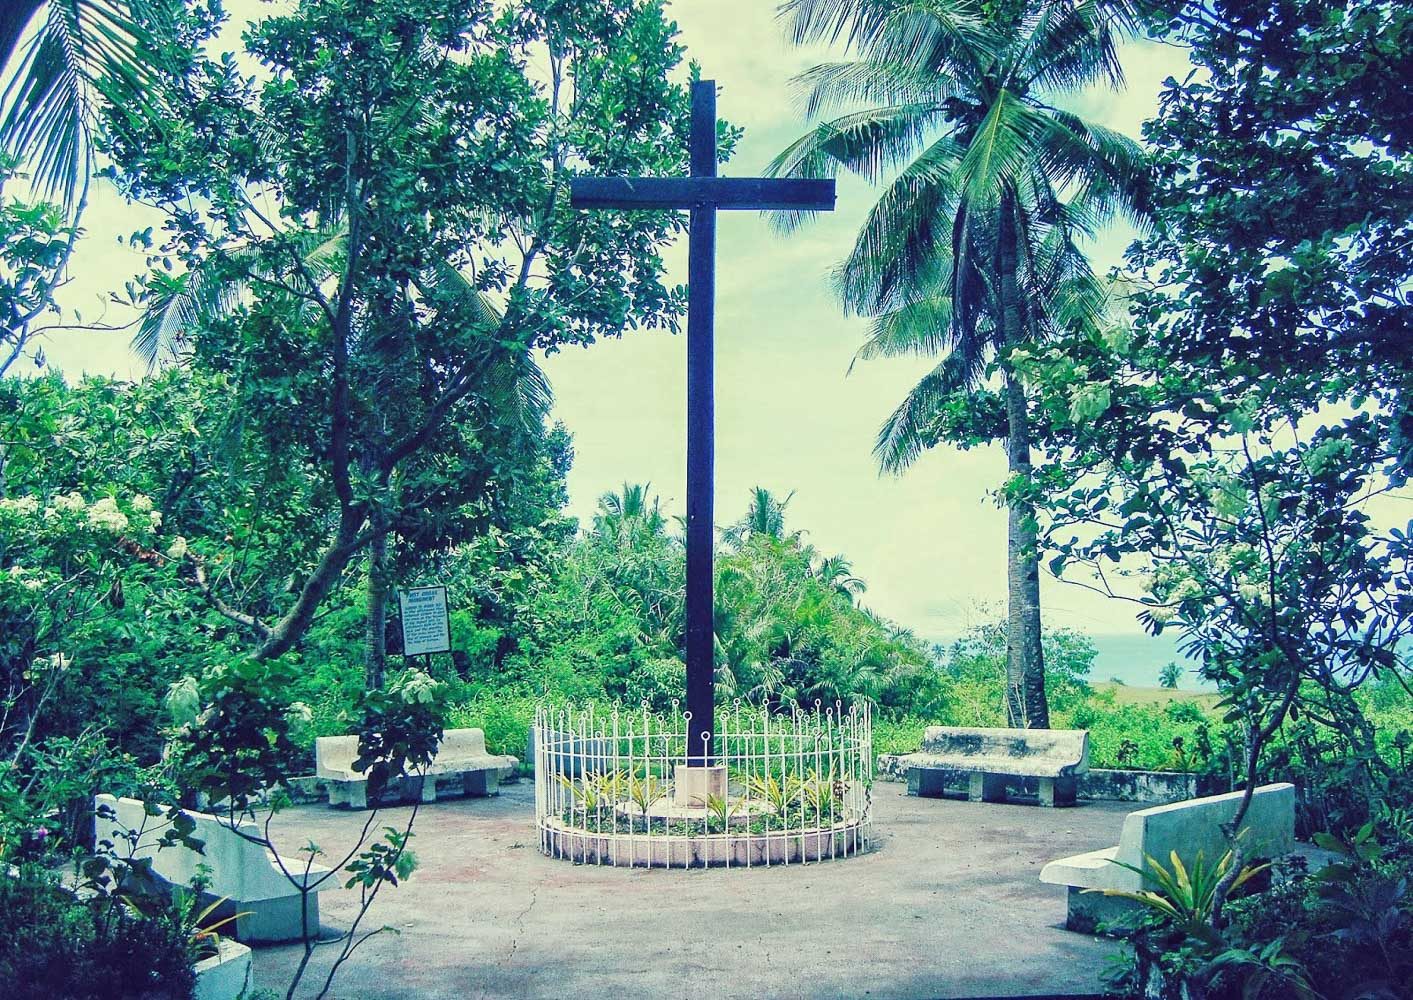 FIRST CROSS. A few minutes away from the beach is the first cross planted in the Philippines by the Spaniards. Photo by Ephraim Arriesgado 